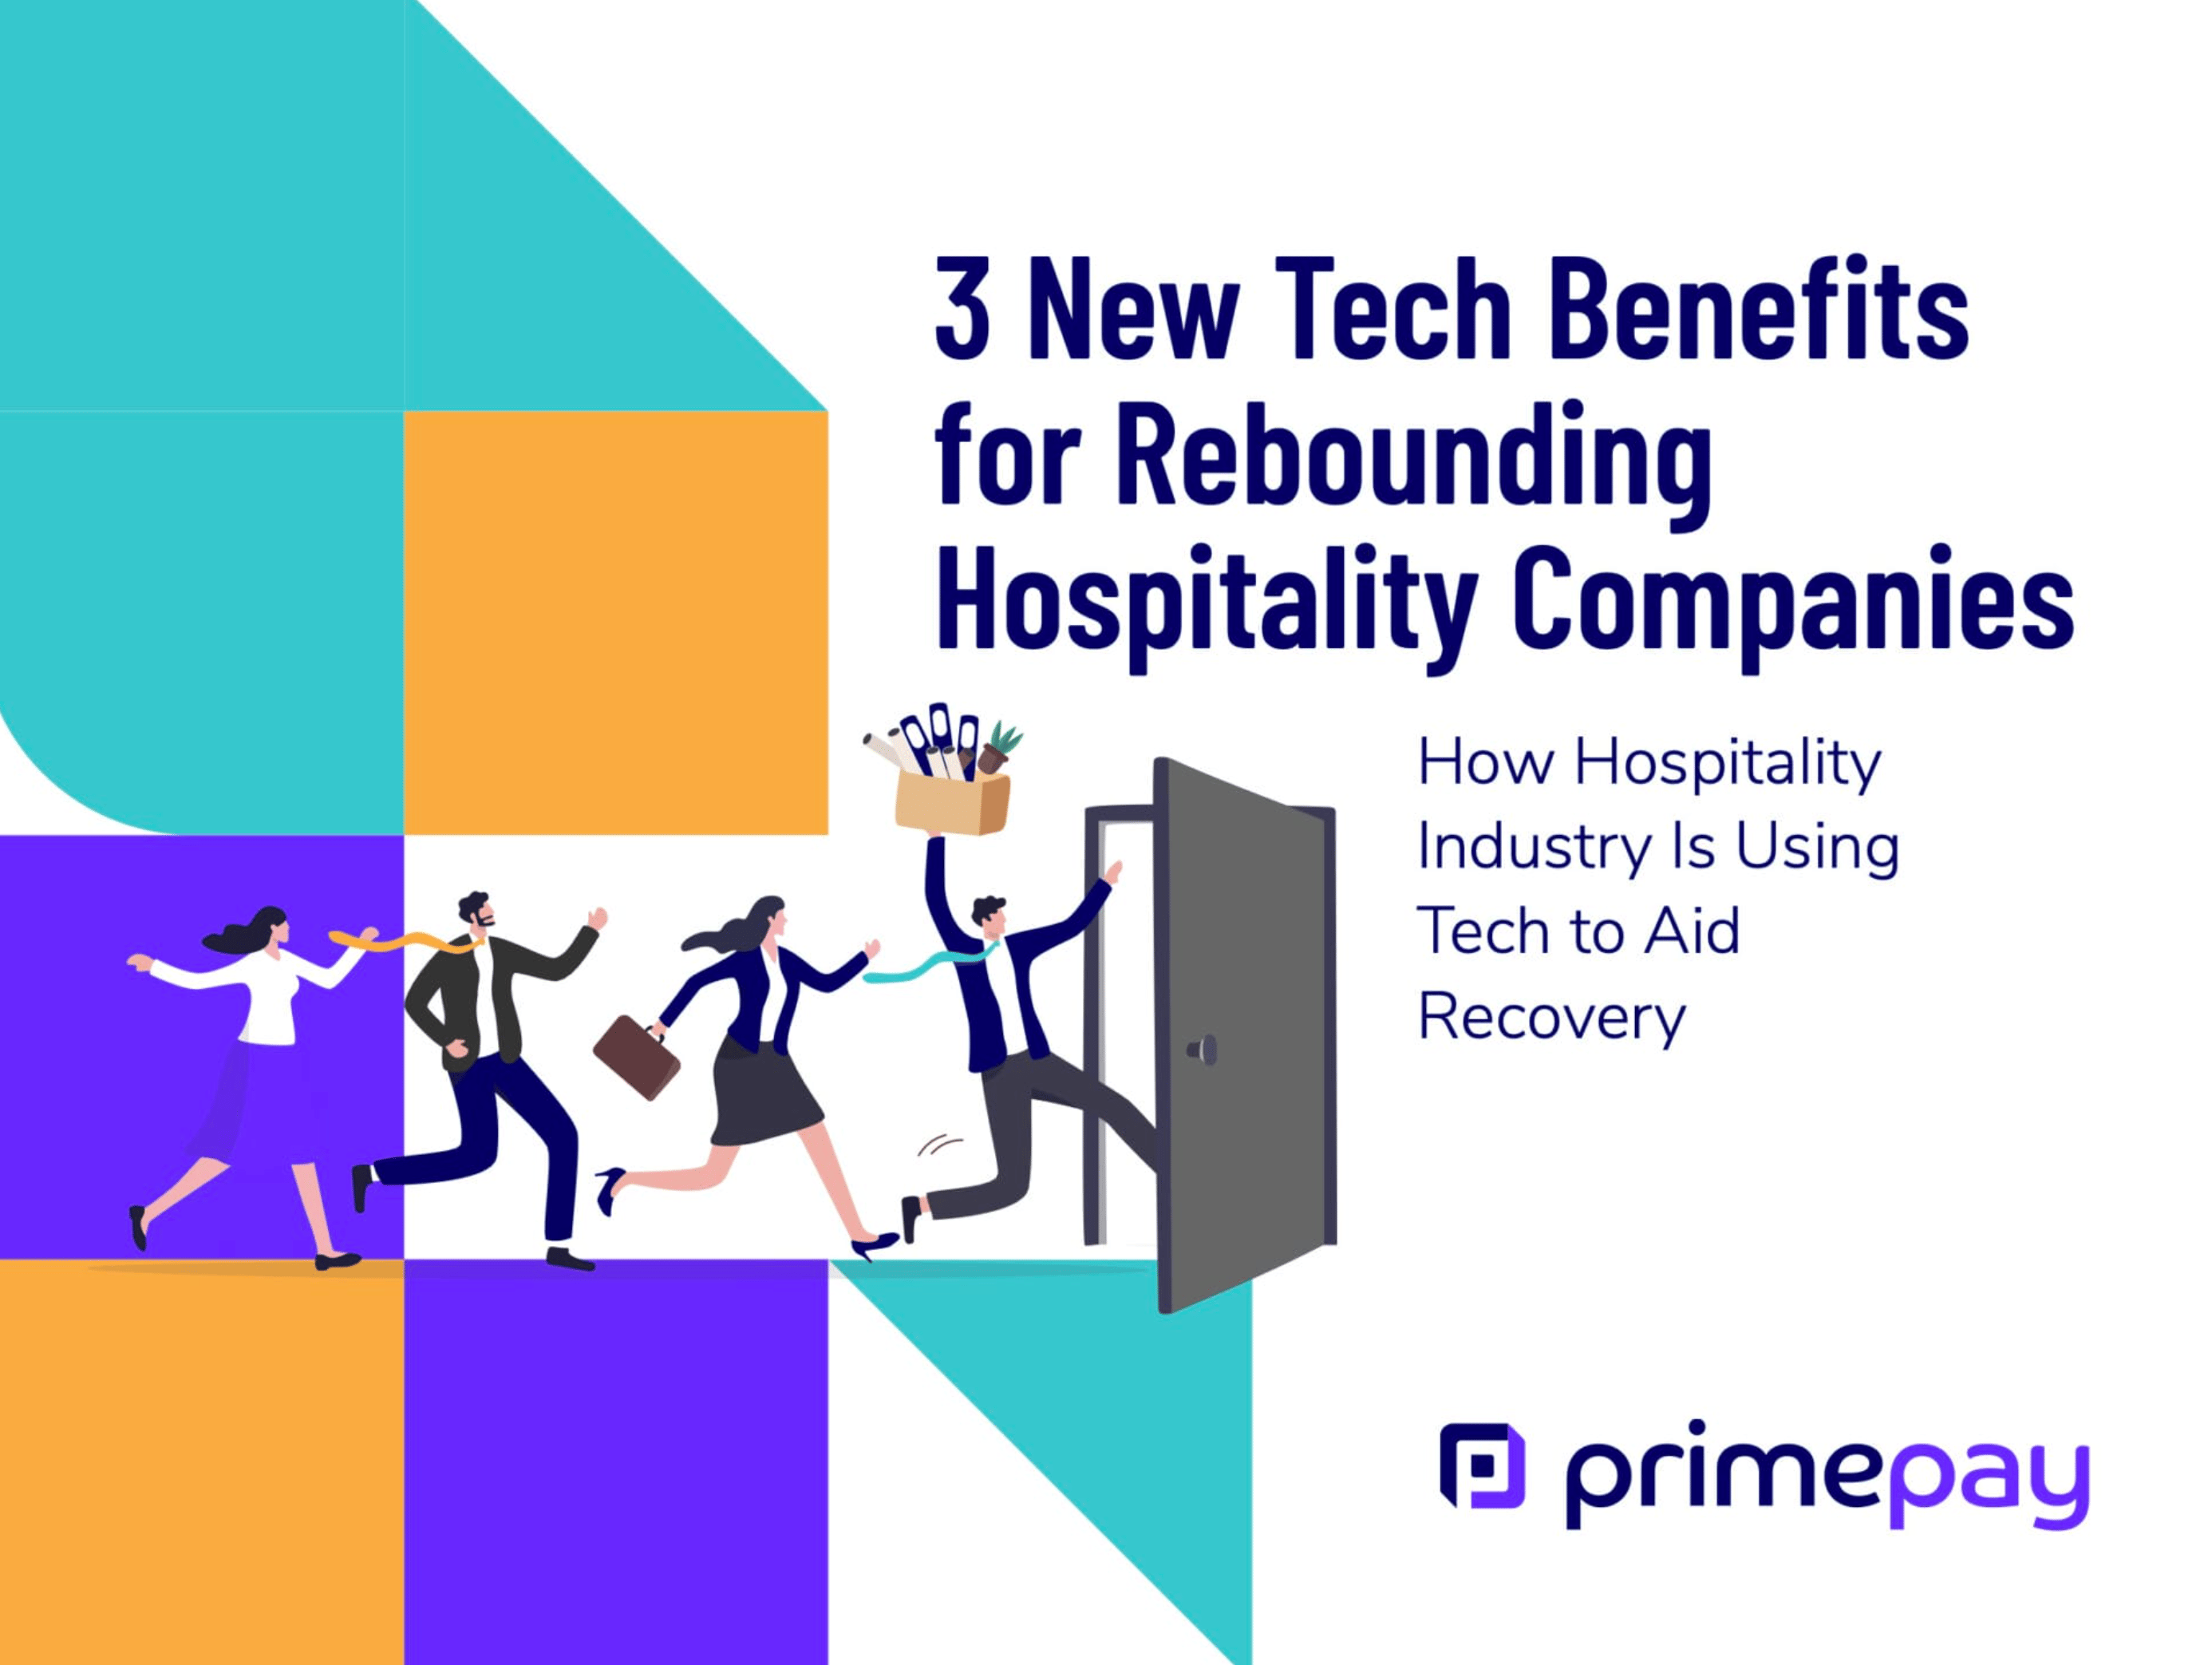 3 New Tech Benefits for Rebounding Hospitality Companies white paper cover.